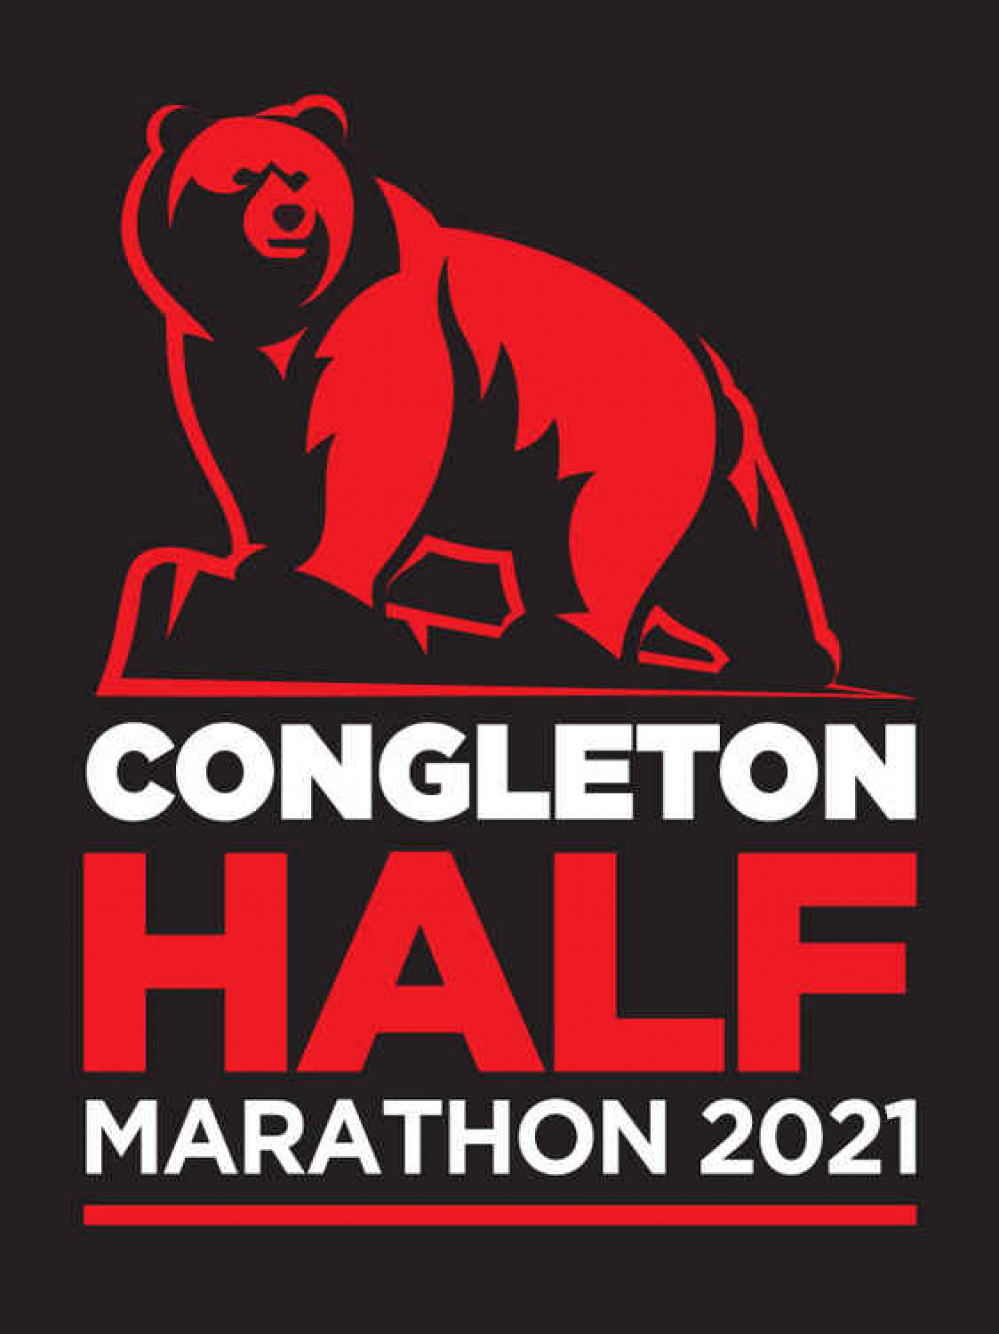 (Image by Congleton Harriers